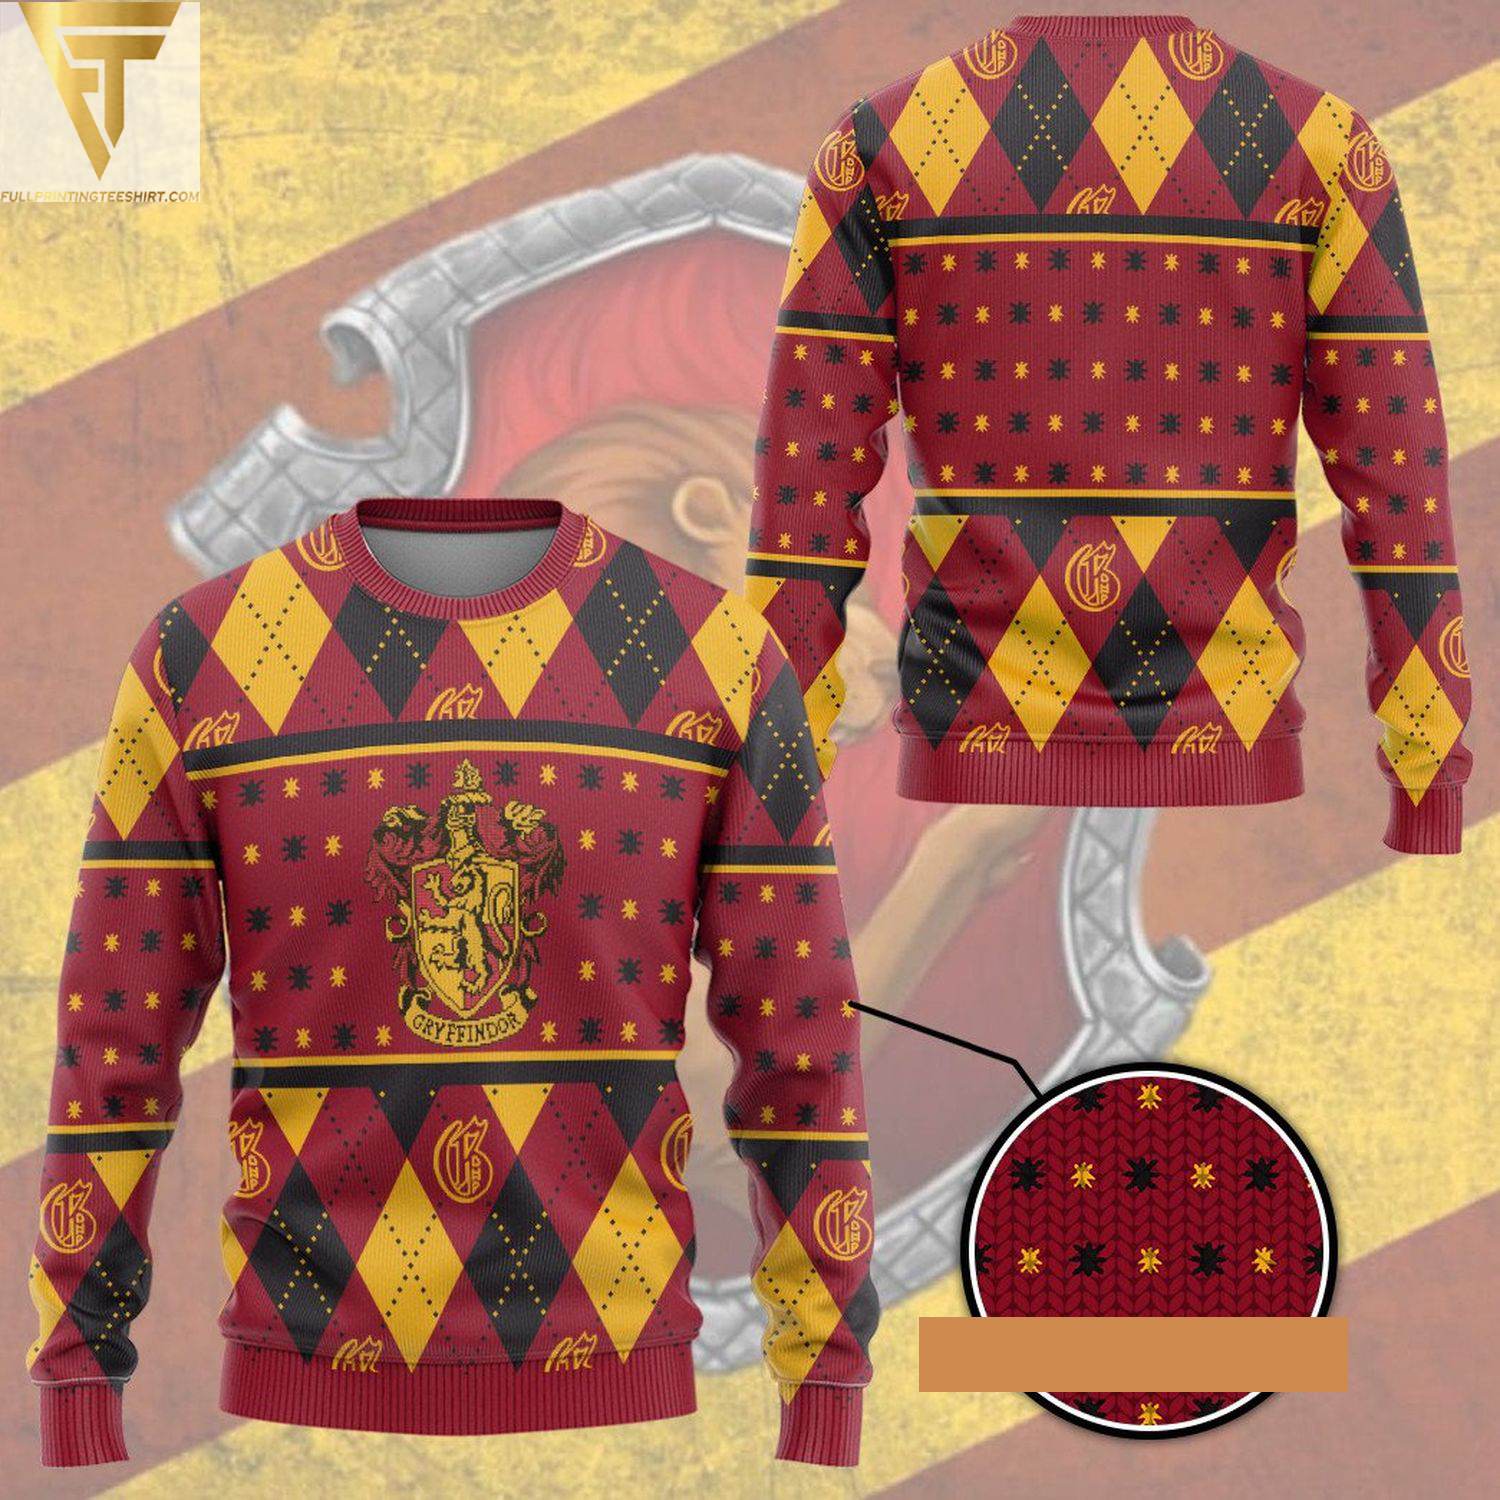 Harry potter gryffindor crest holiday ugly christmas sweater - Copy (2)